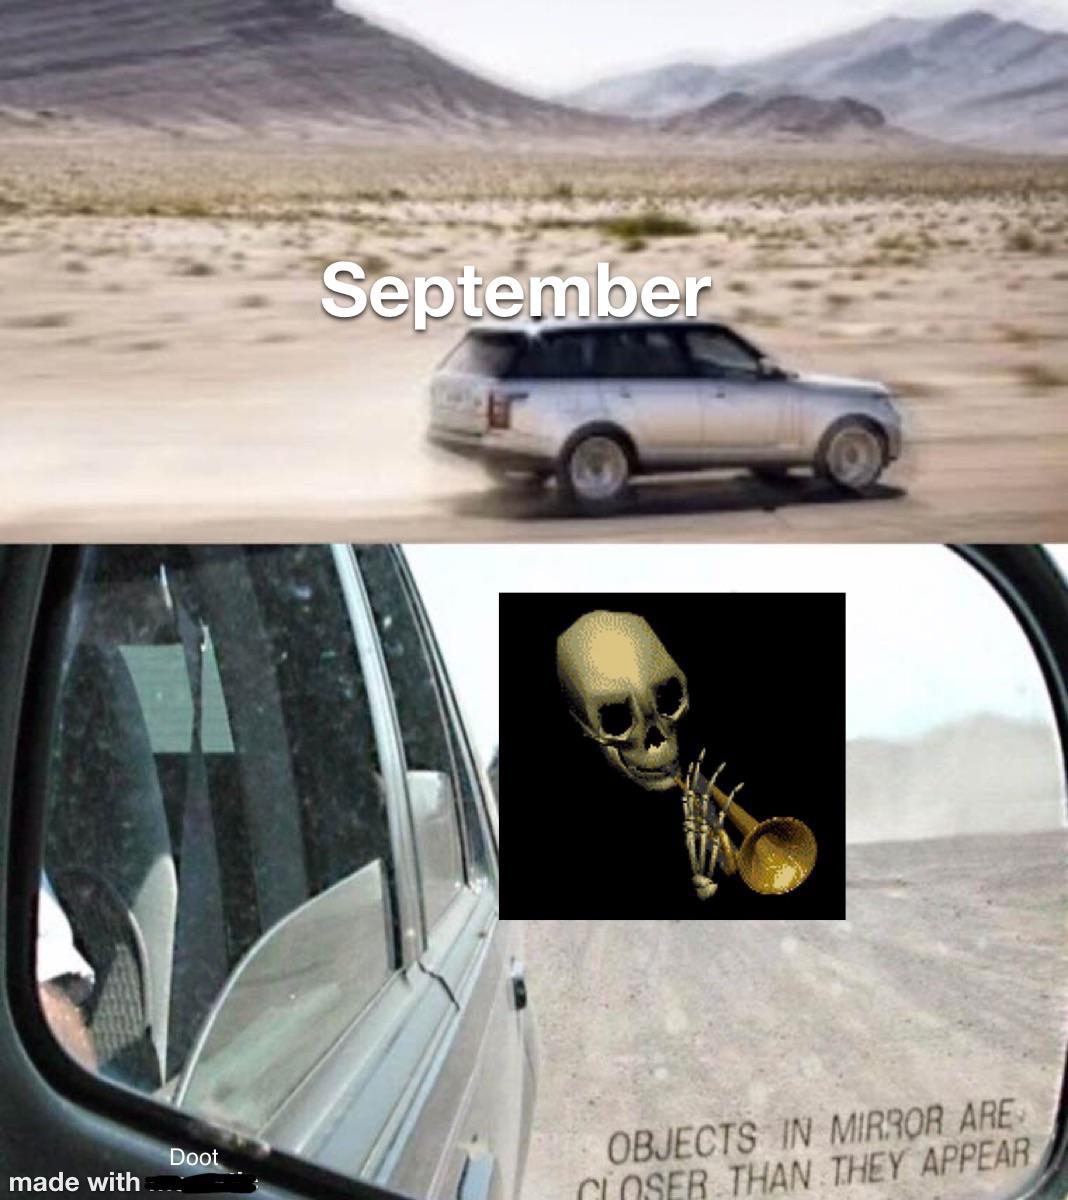 sadness is closer than it appears meme - September Doot made with Objects In Mirror Are Coser Than They Appear